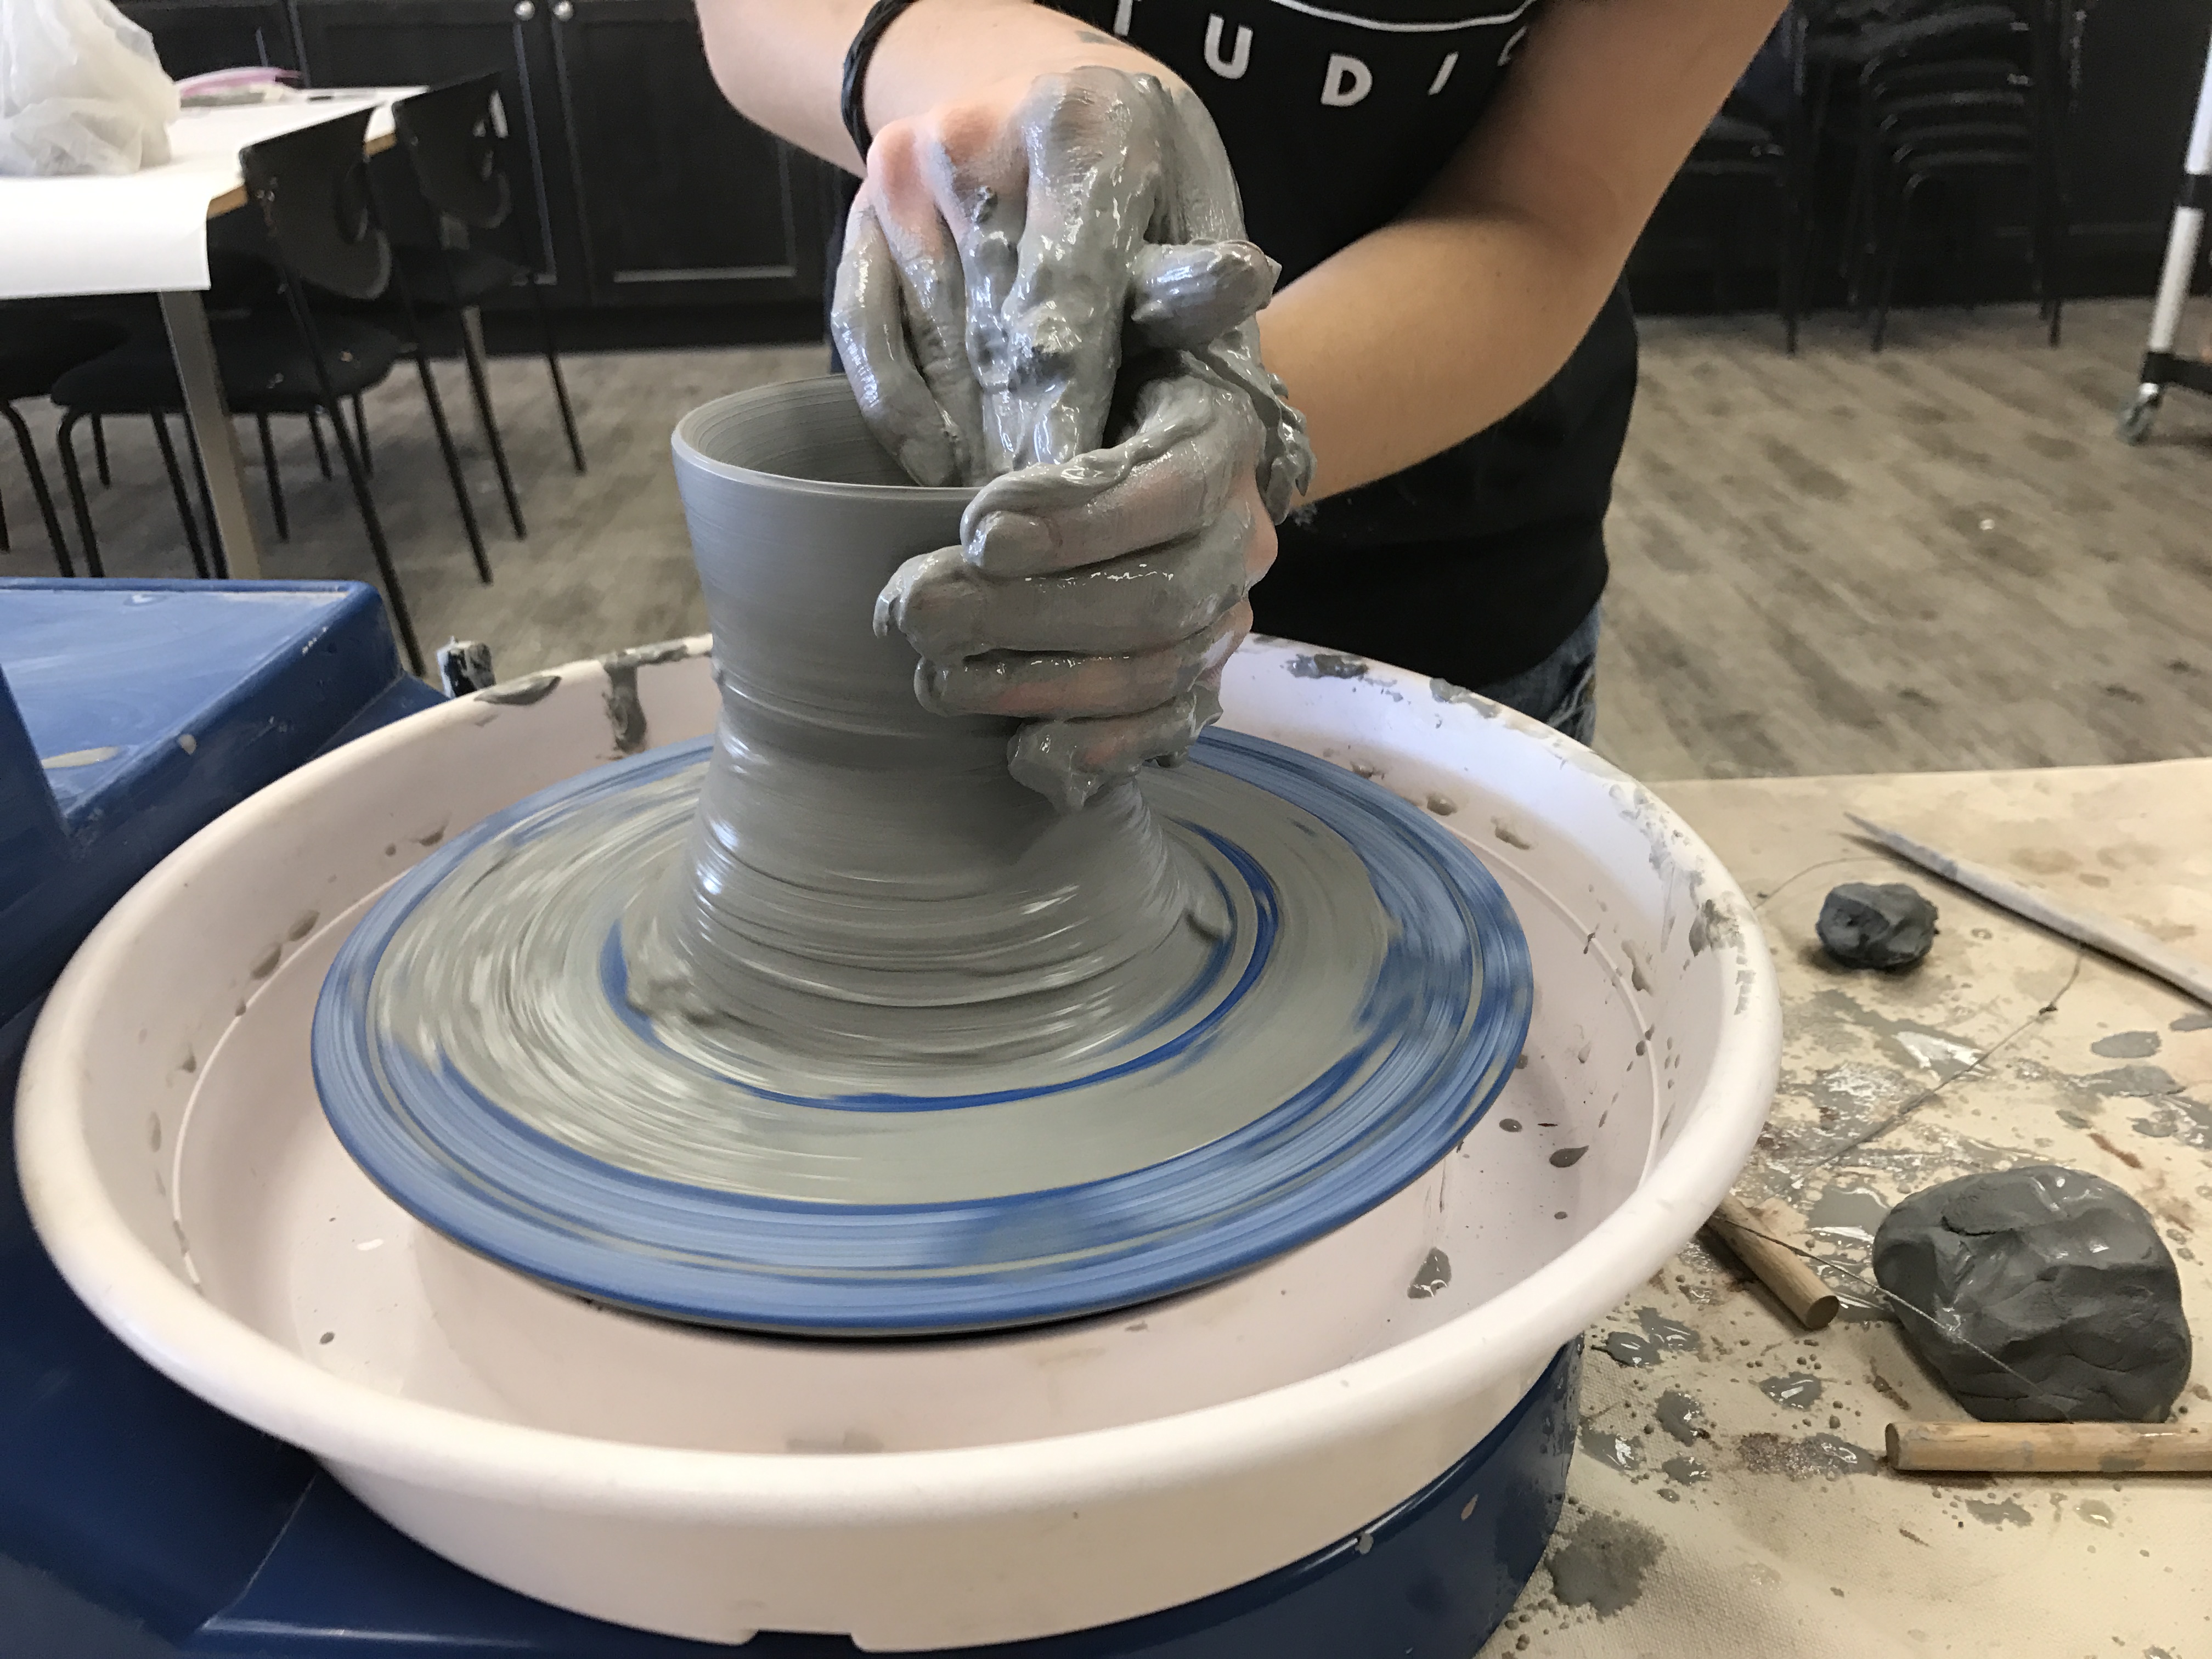 Kids Clay & More Pottery Wheel Class, Ages 10 & up • The ...